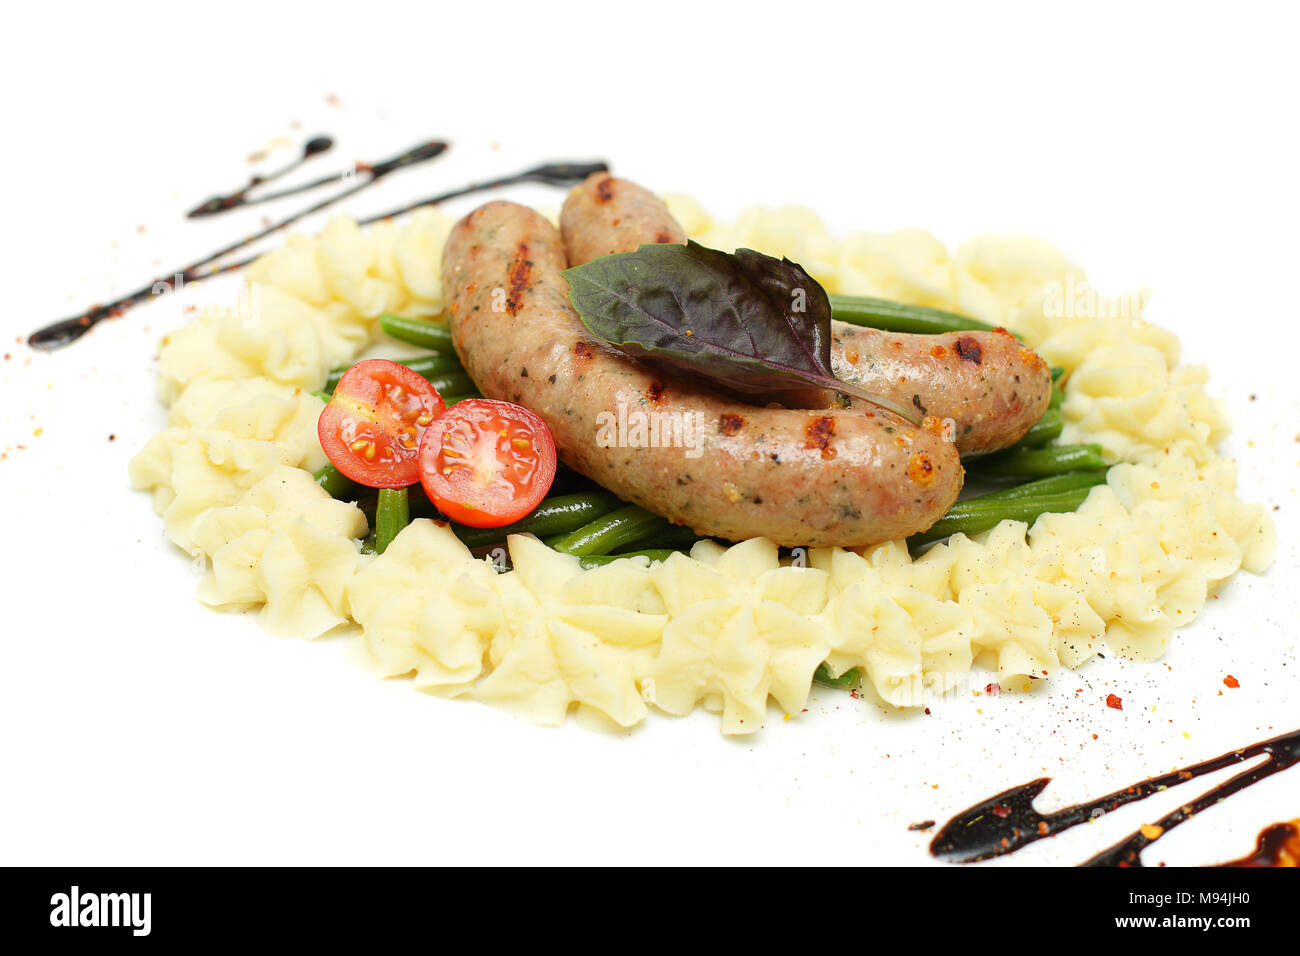 Weisswurst sausage, traditional German food Stock Photo